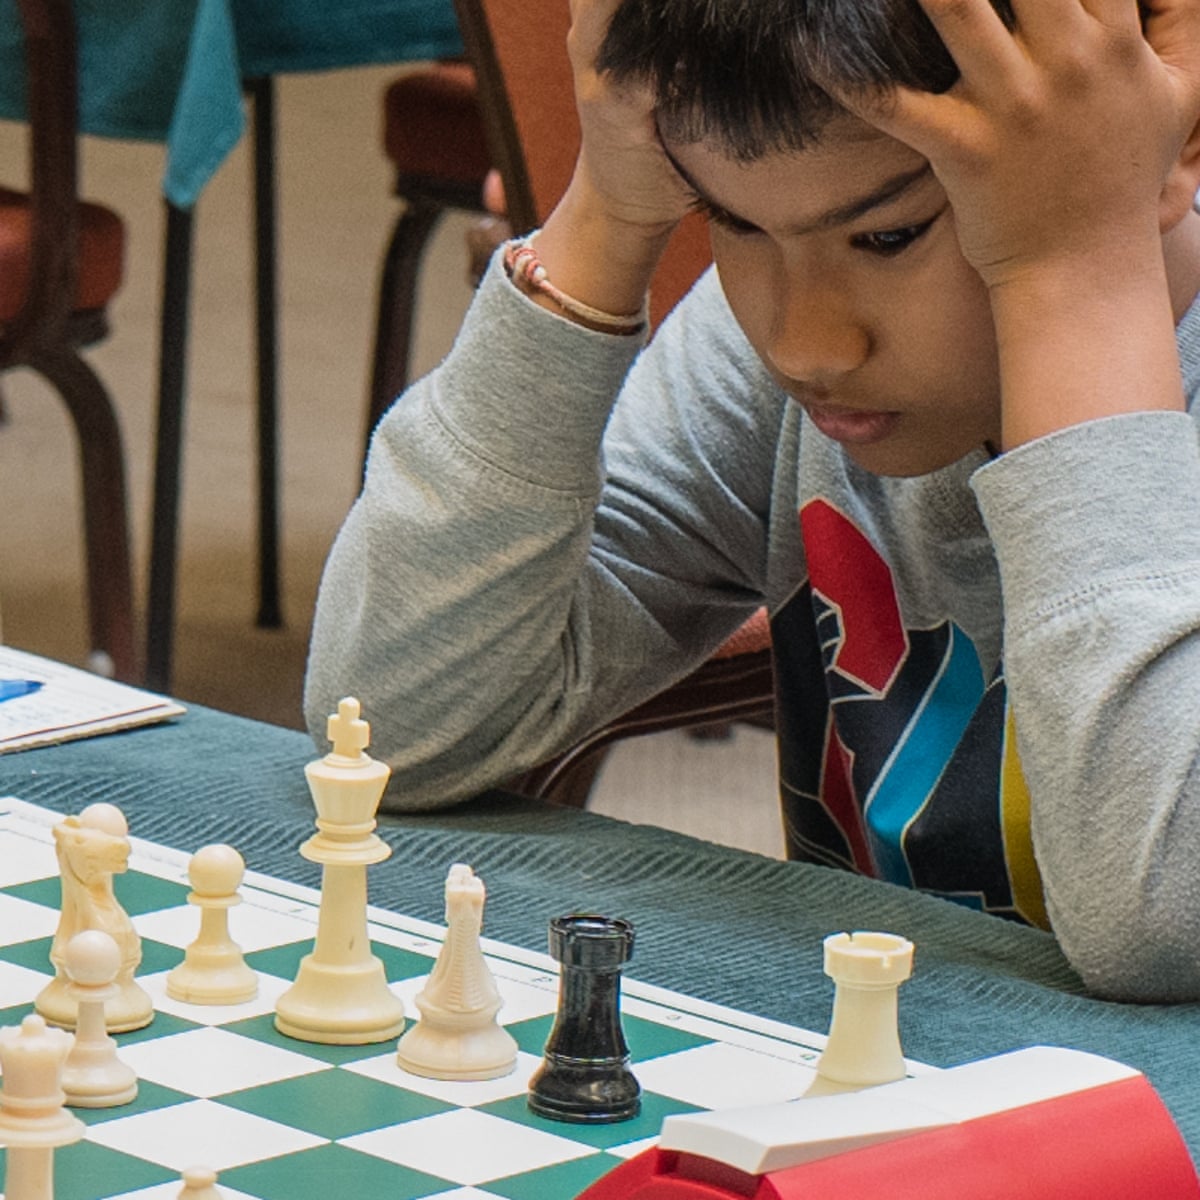 Nine-year-old chess prodigy told he can stay in UK, Chess